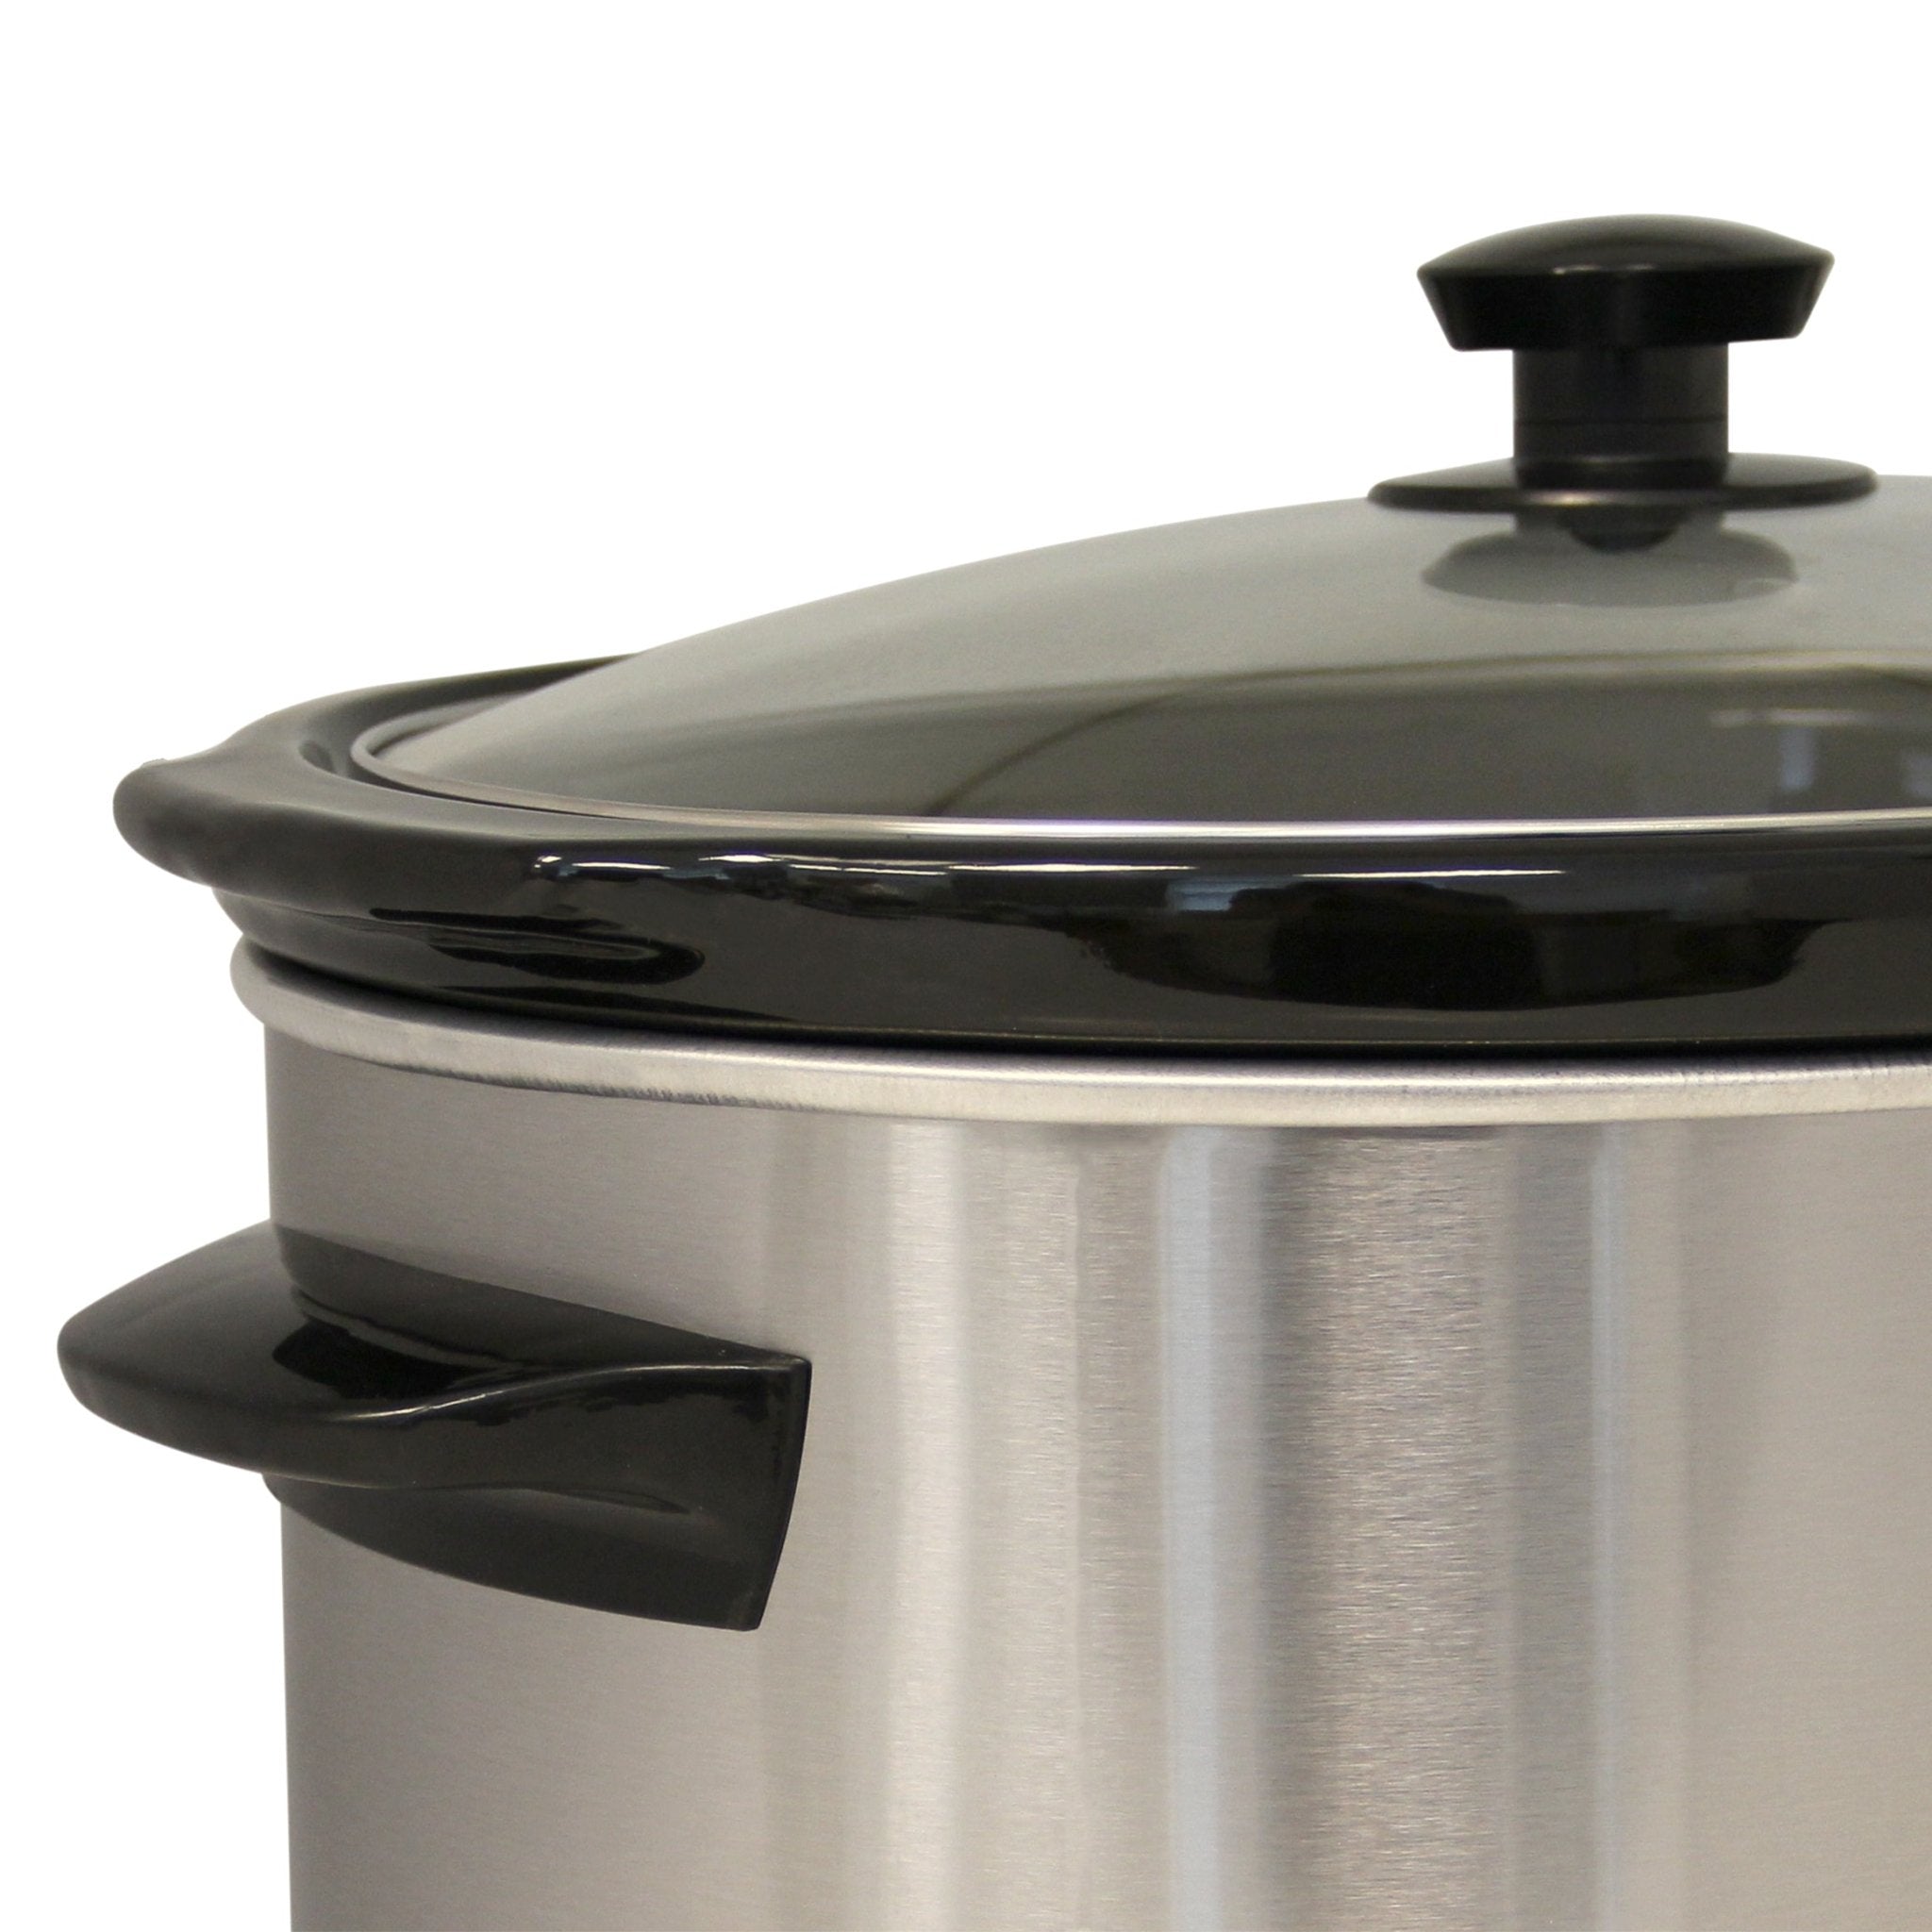 West Bend 87906 6 Qt. Oblong Slow Cooker with Tote - Stainless, 1 - Kroger